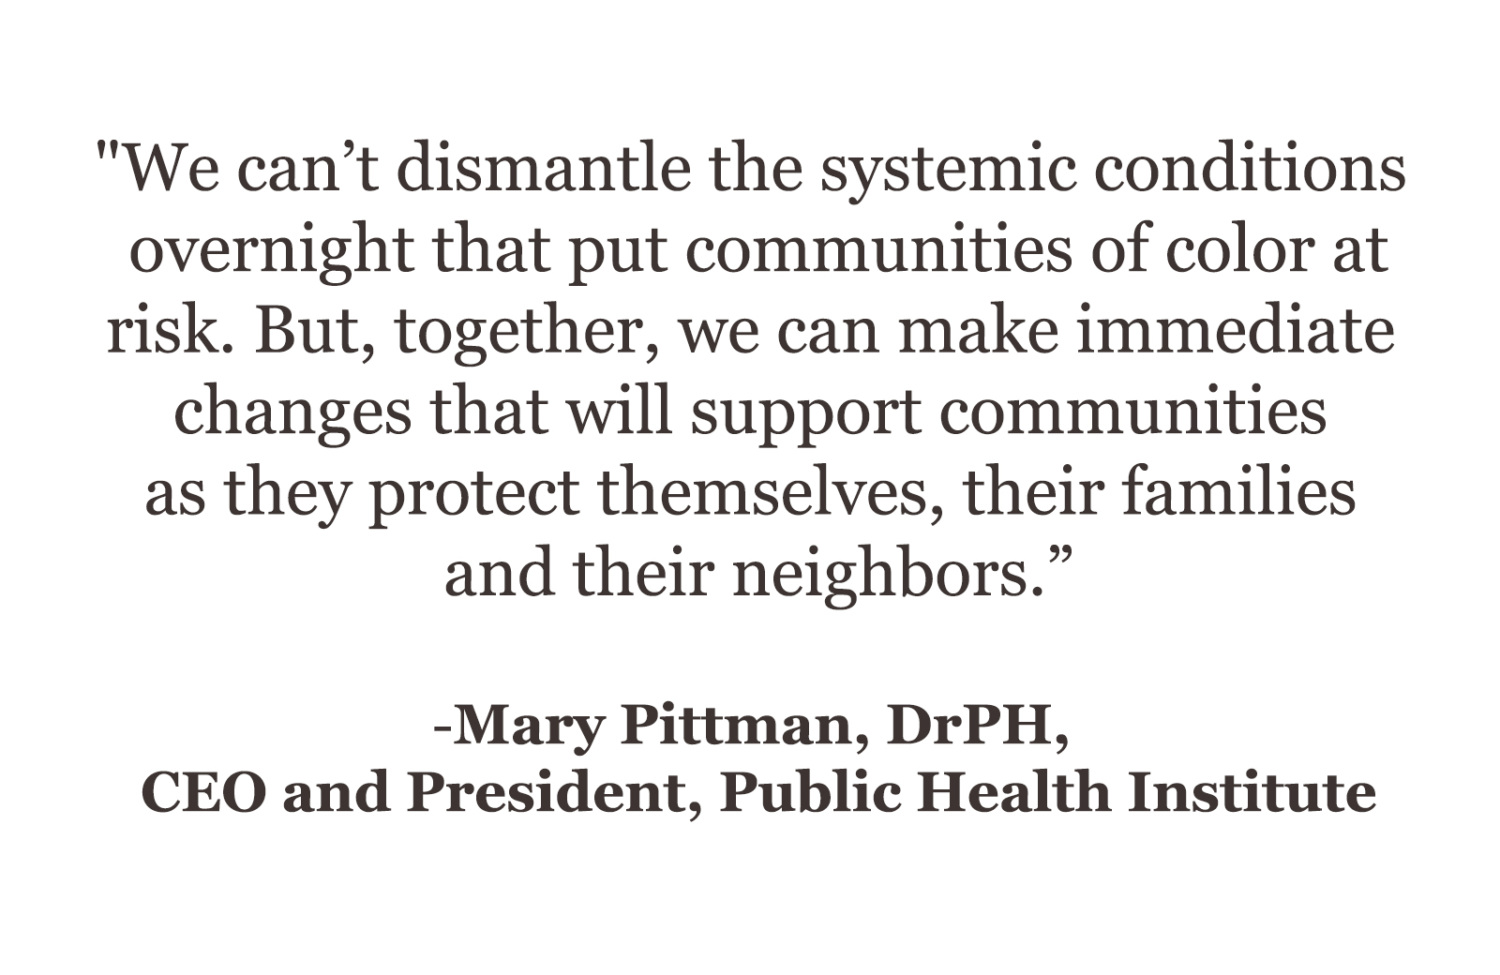 Quote form Mary Pittman